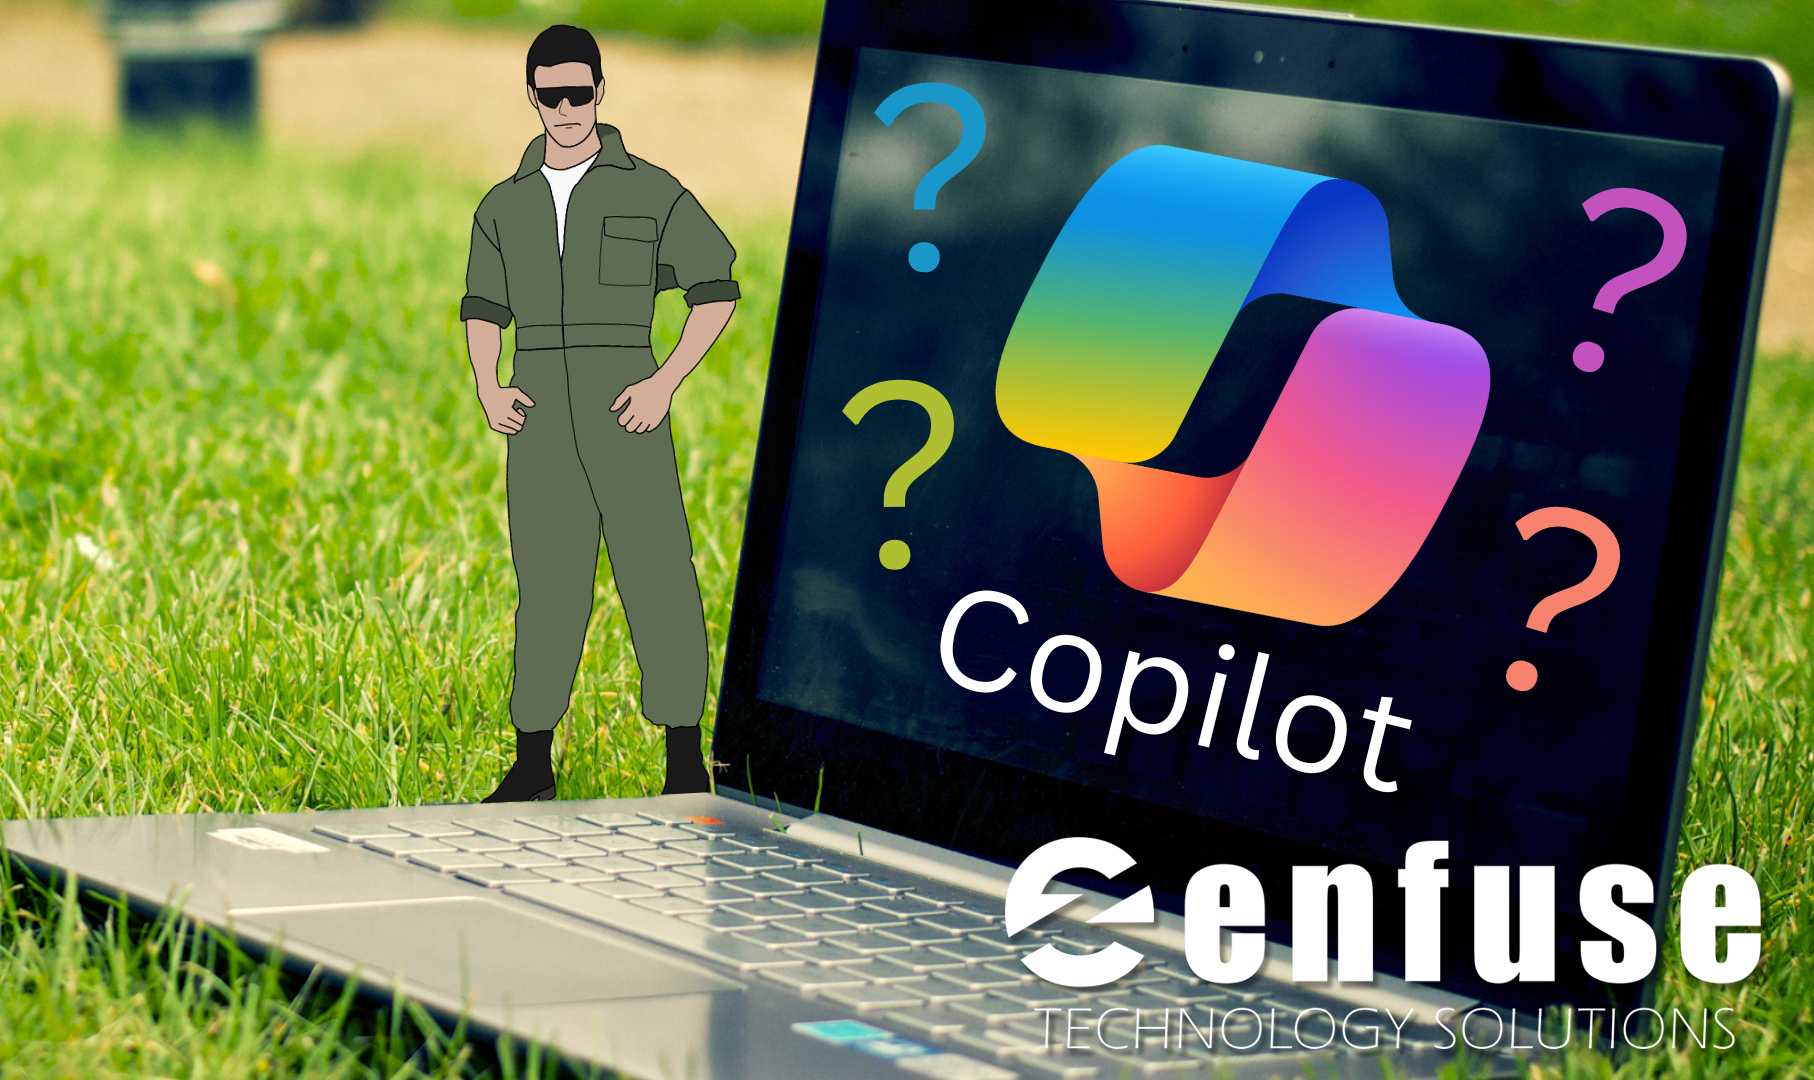 You’ve heard of Copilot… but what is it